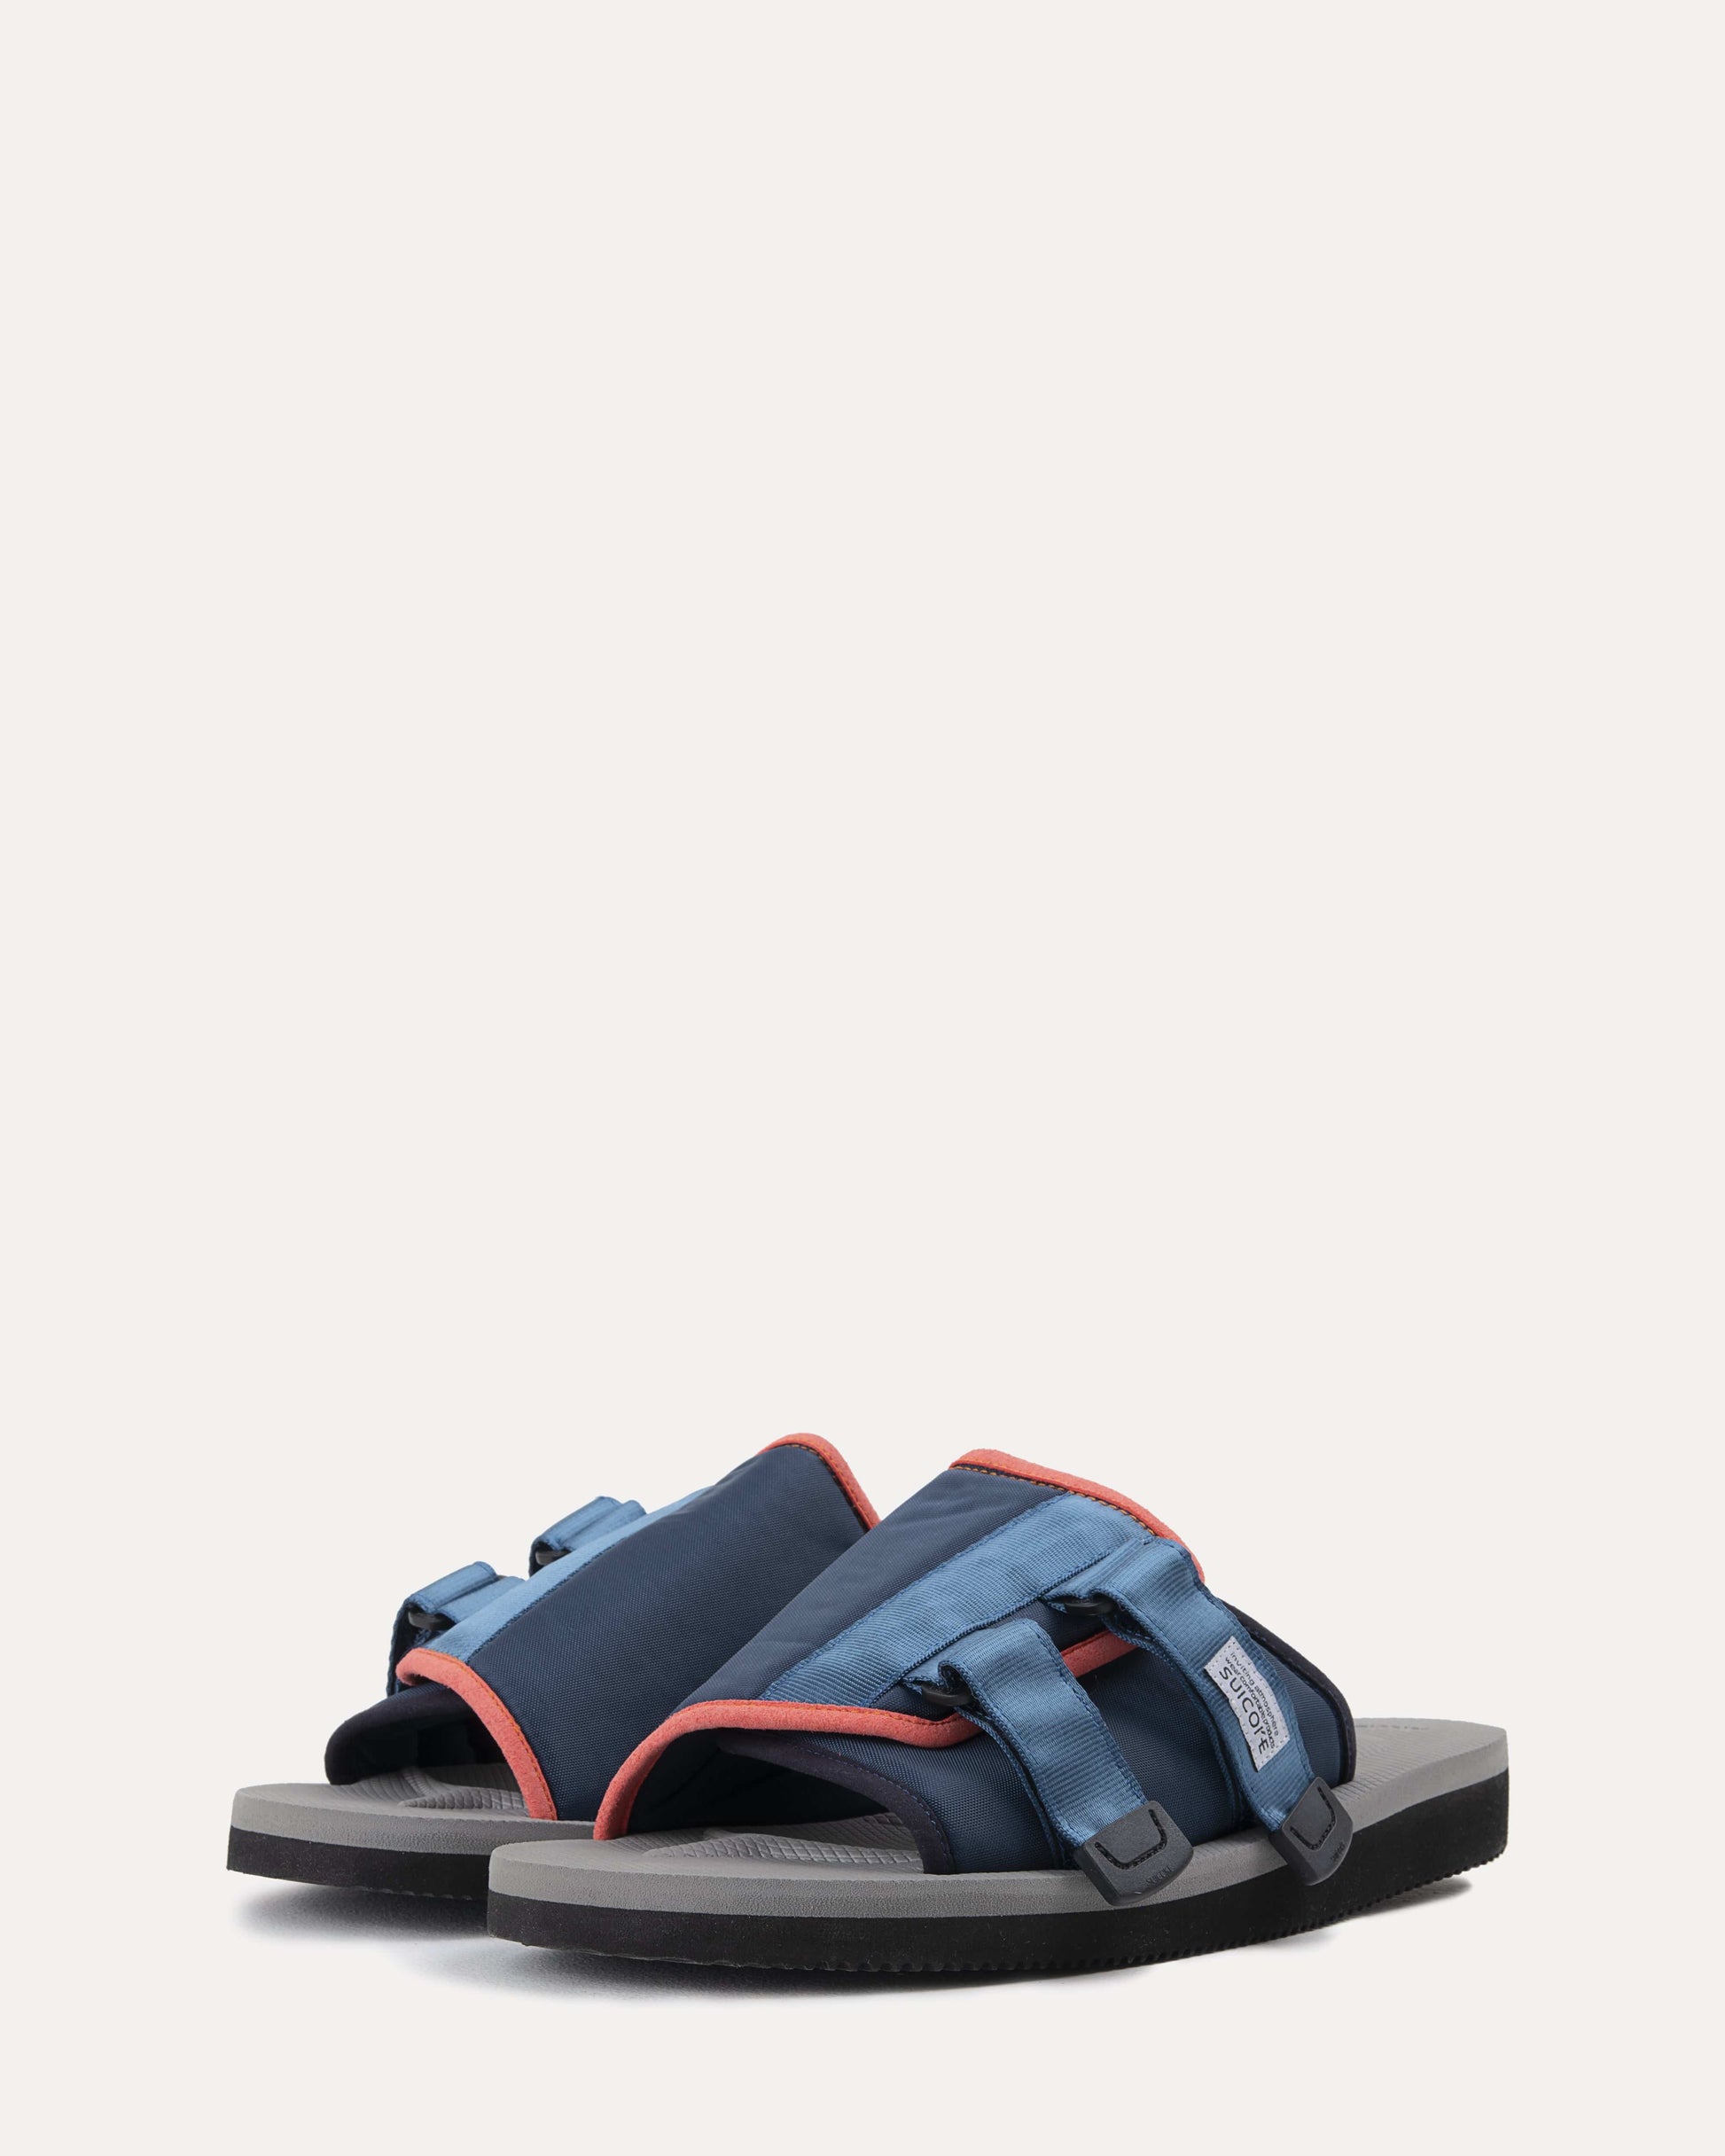 Suicoke Unisex Sandals Kaw Cab in Navy & Grey